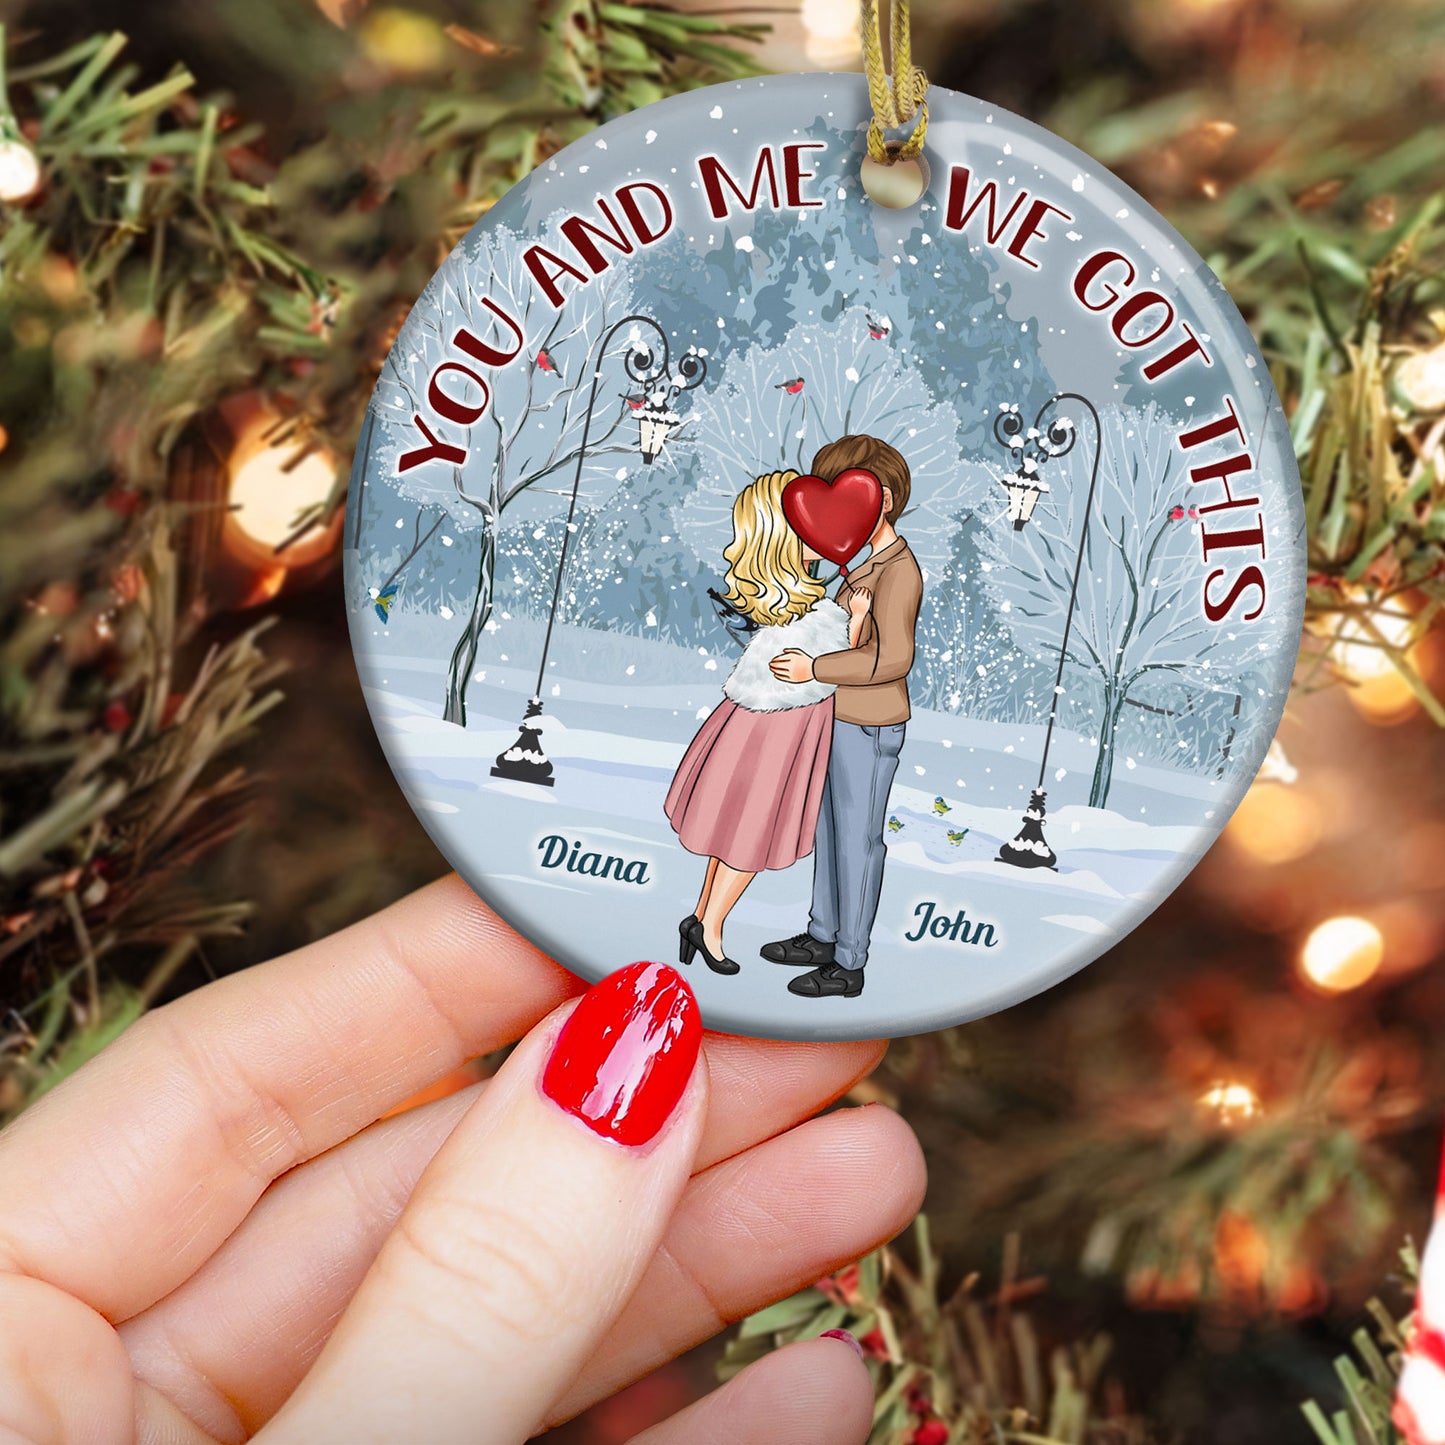 You And Me We Got This - Personalized Ceramic Ornament